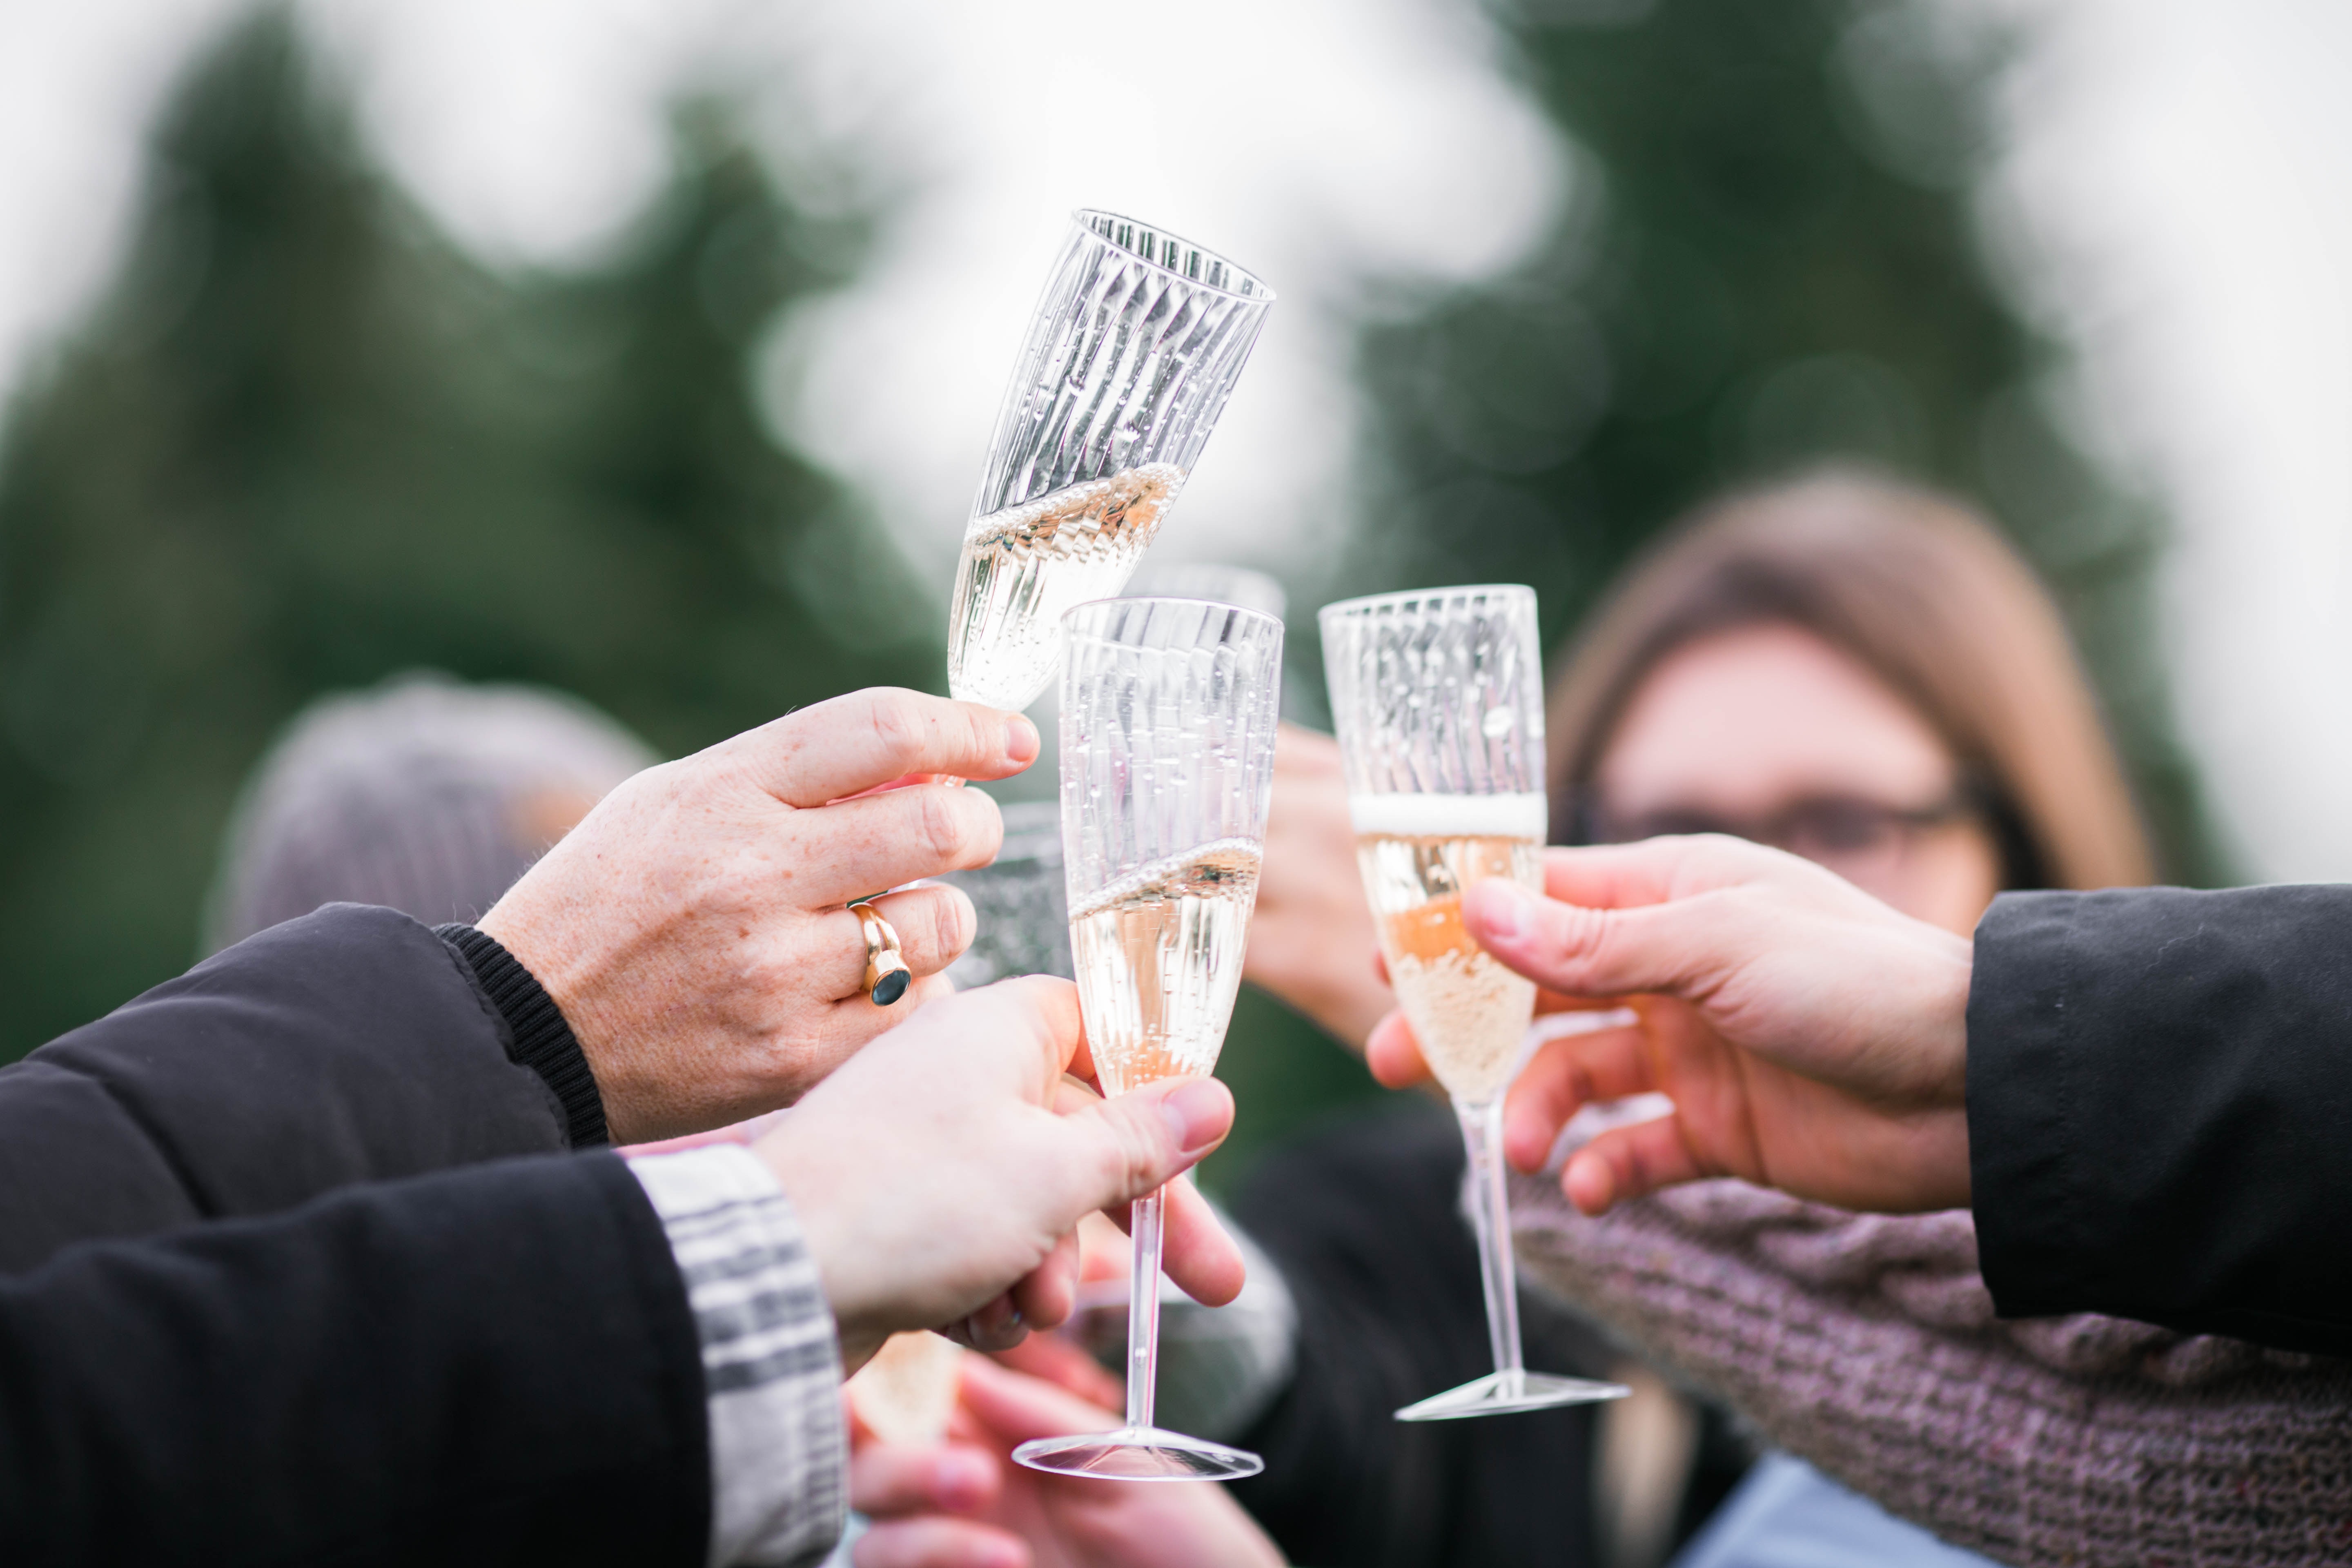 How To Deal With Some Common Wedding Guest Faux Pas